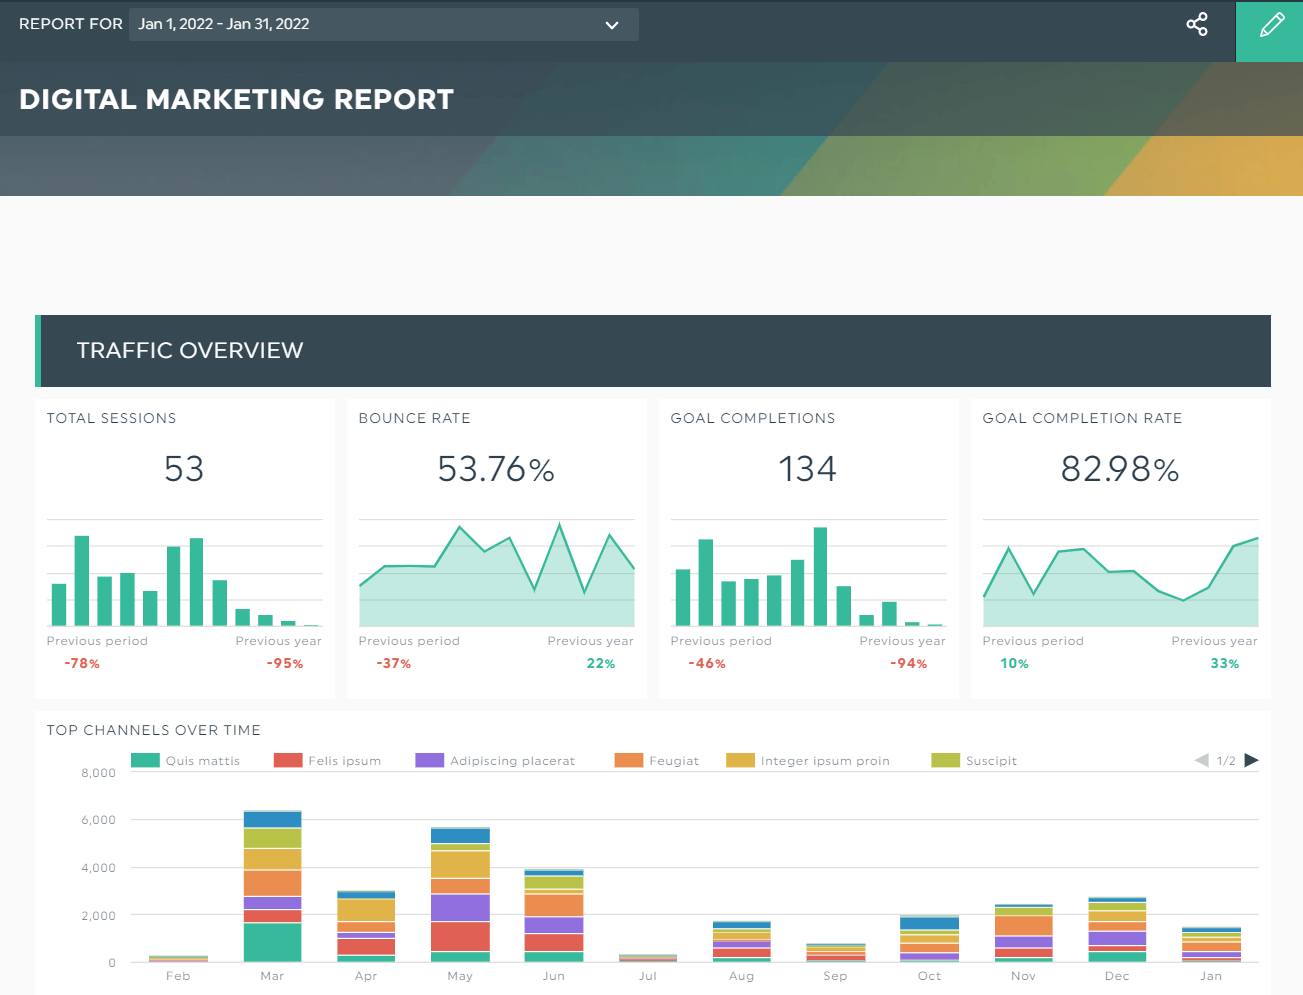 business planning dashboard template